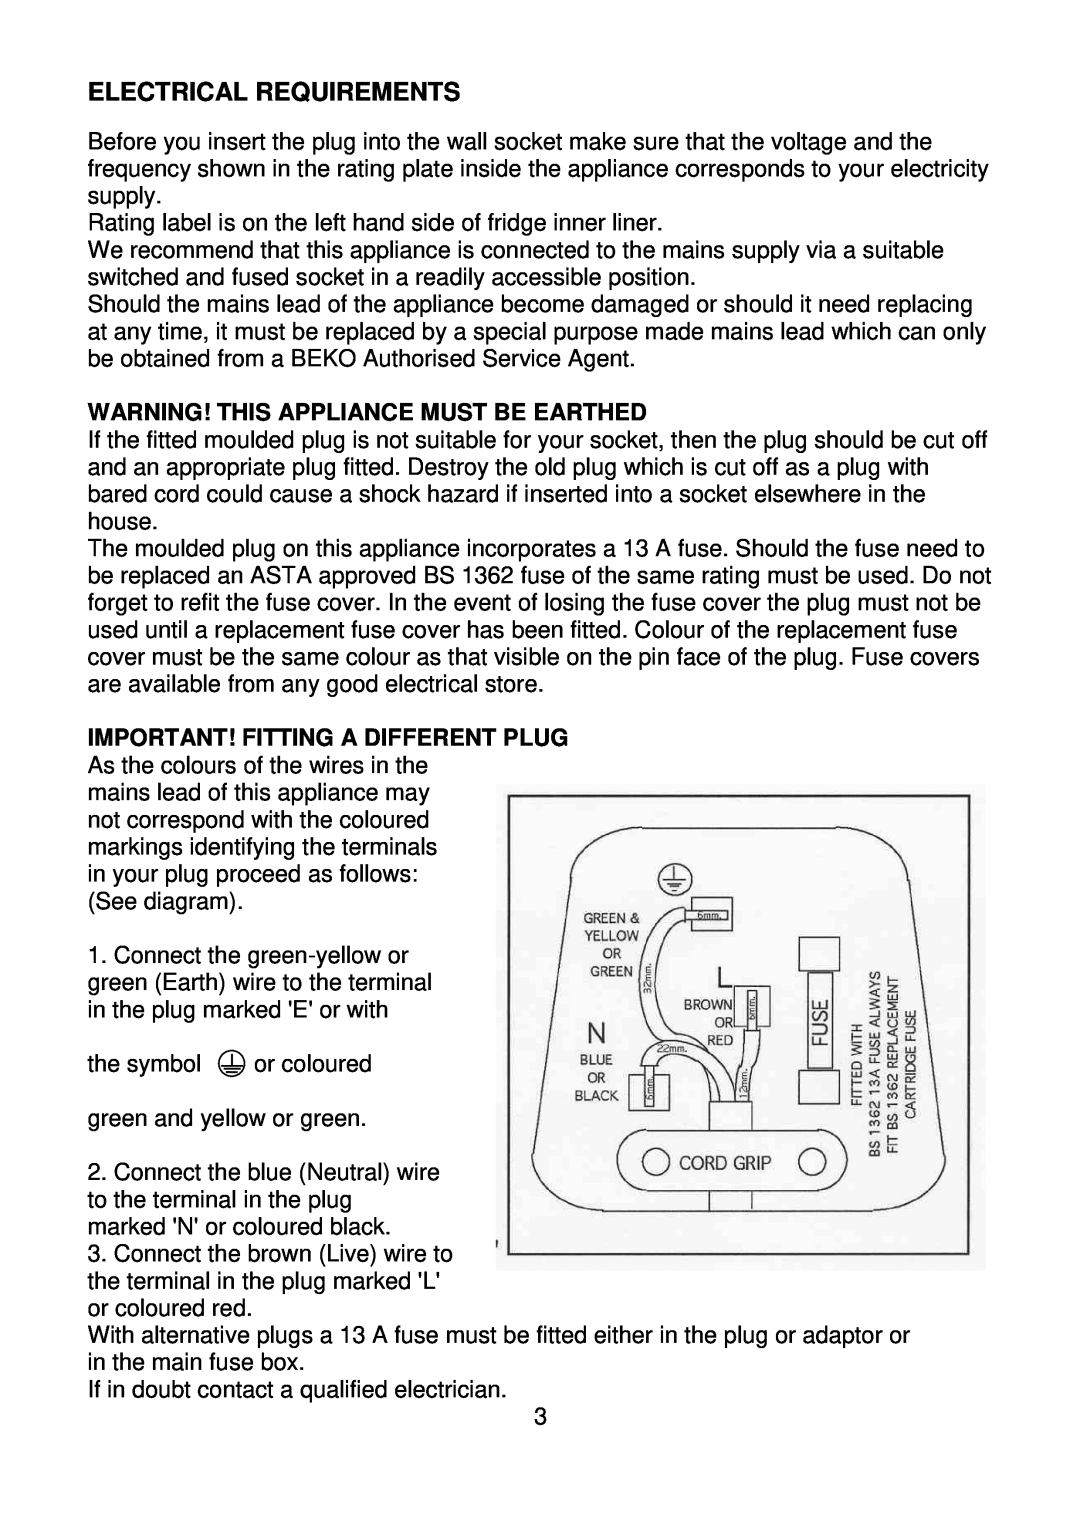 Beko CDA671F Electrical Requirements, Warning! This Appliance Must Be Earthed, Important! Fitting A Different Plug 